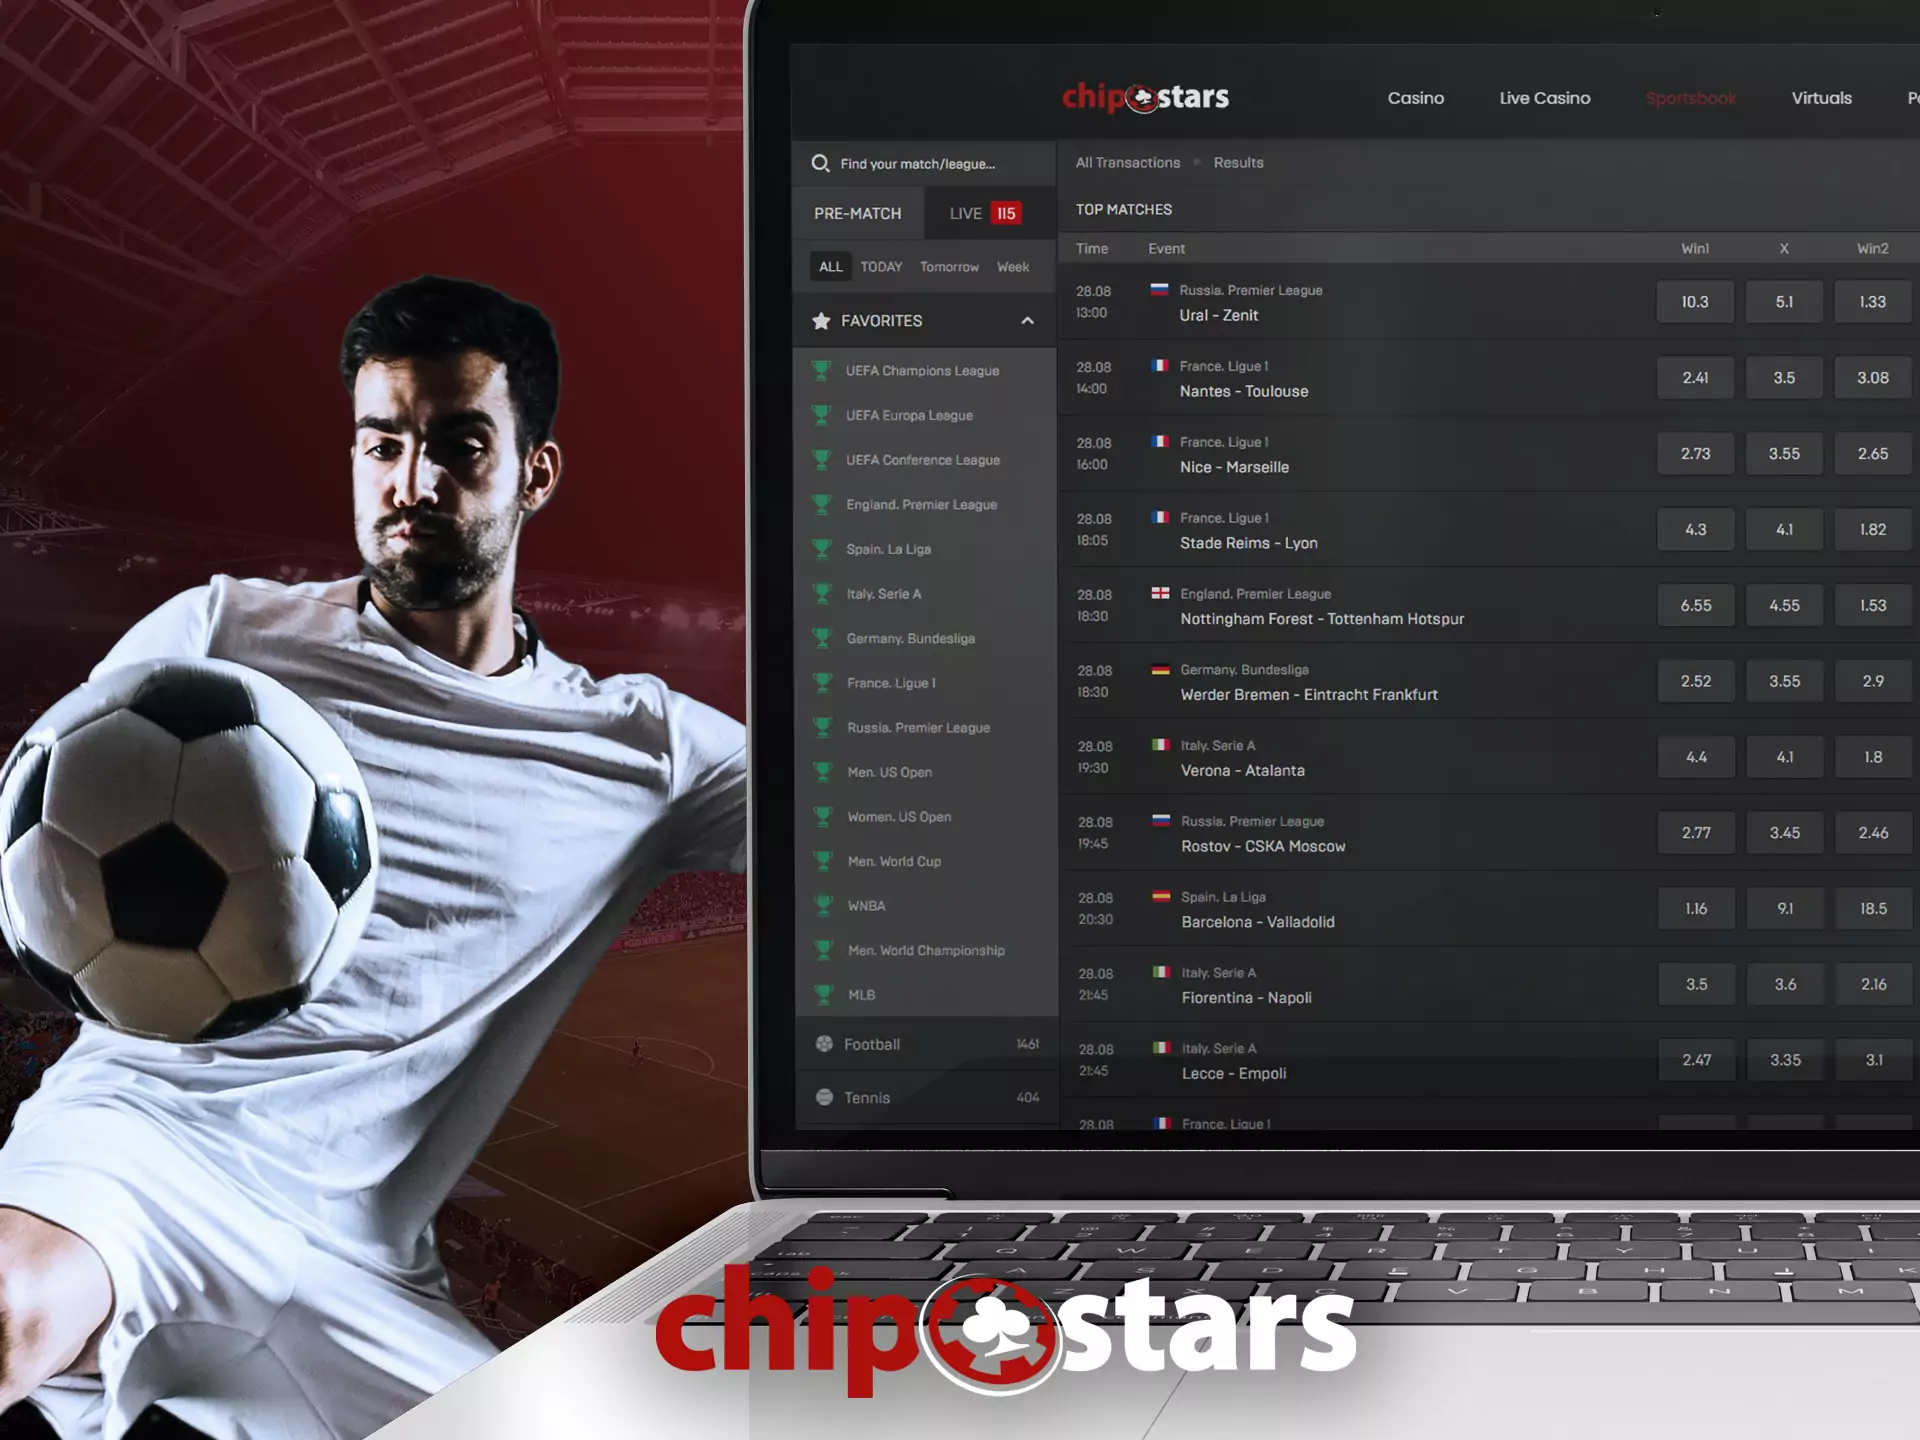 In the line and live sections, you find all the available football matches on Chipstars.